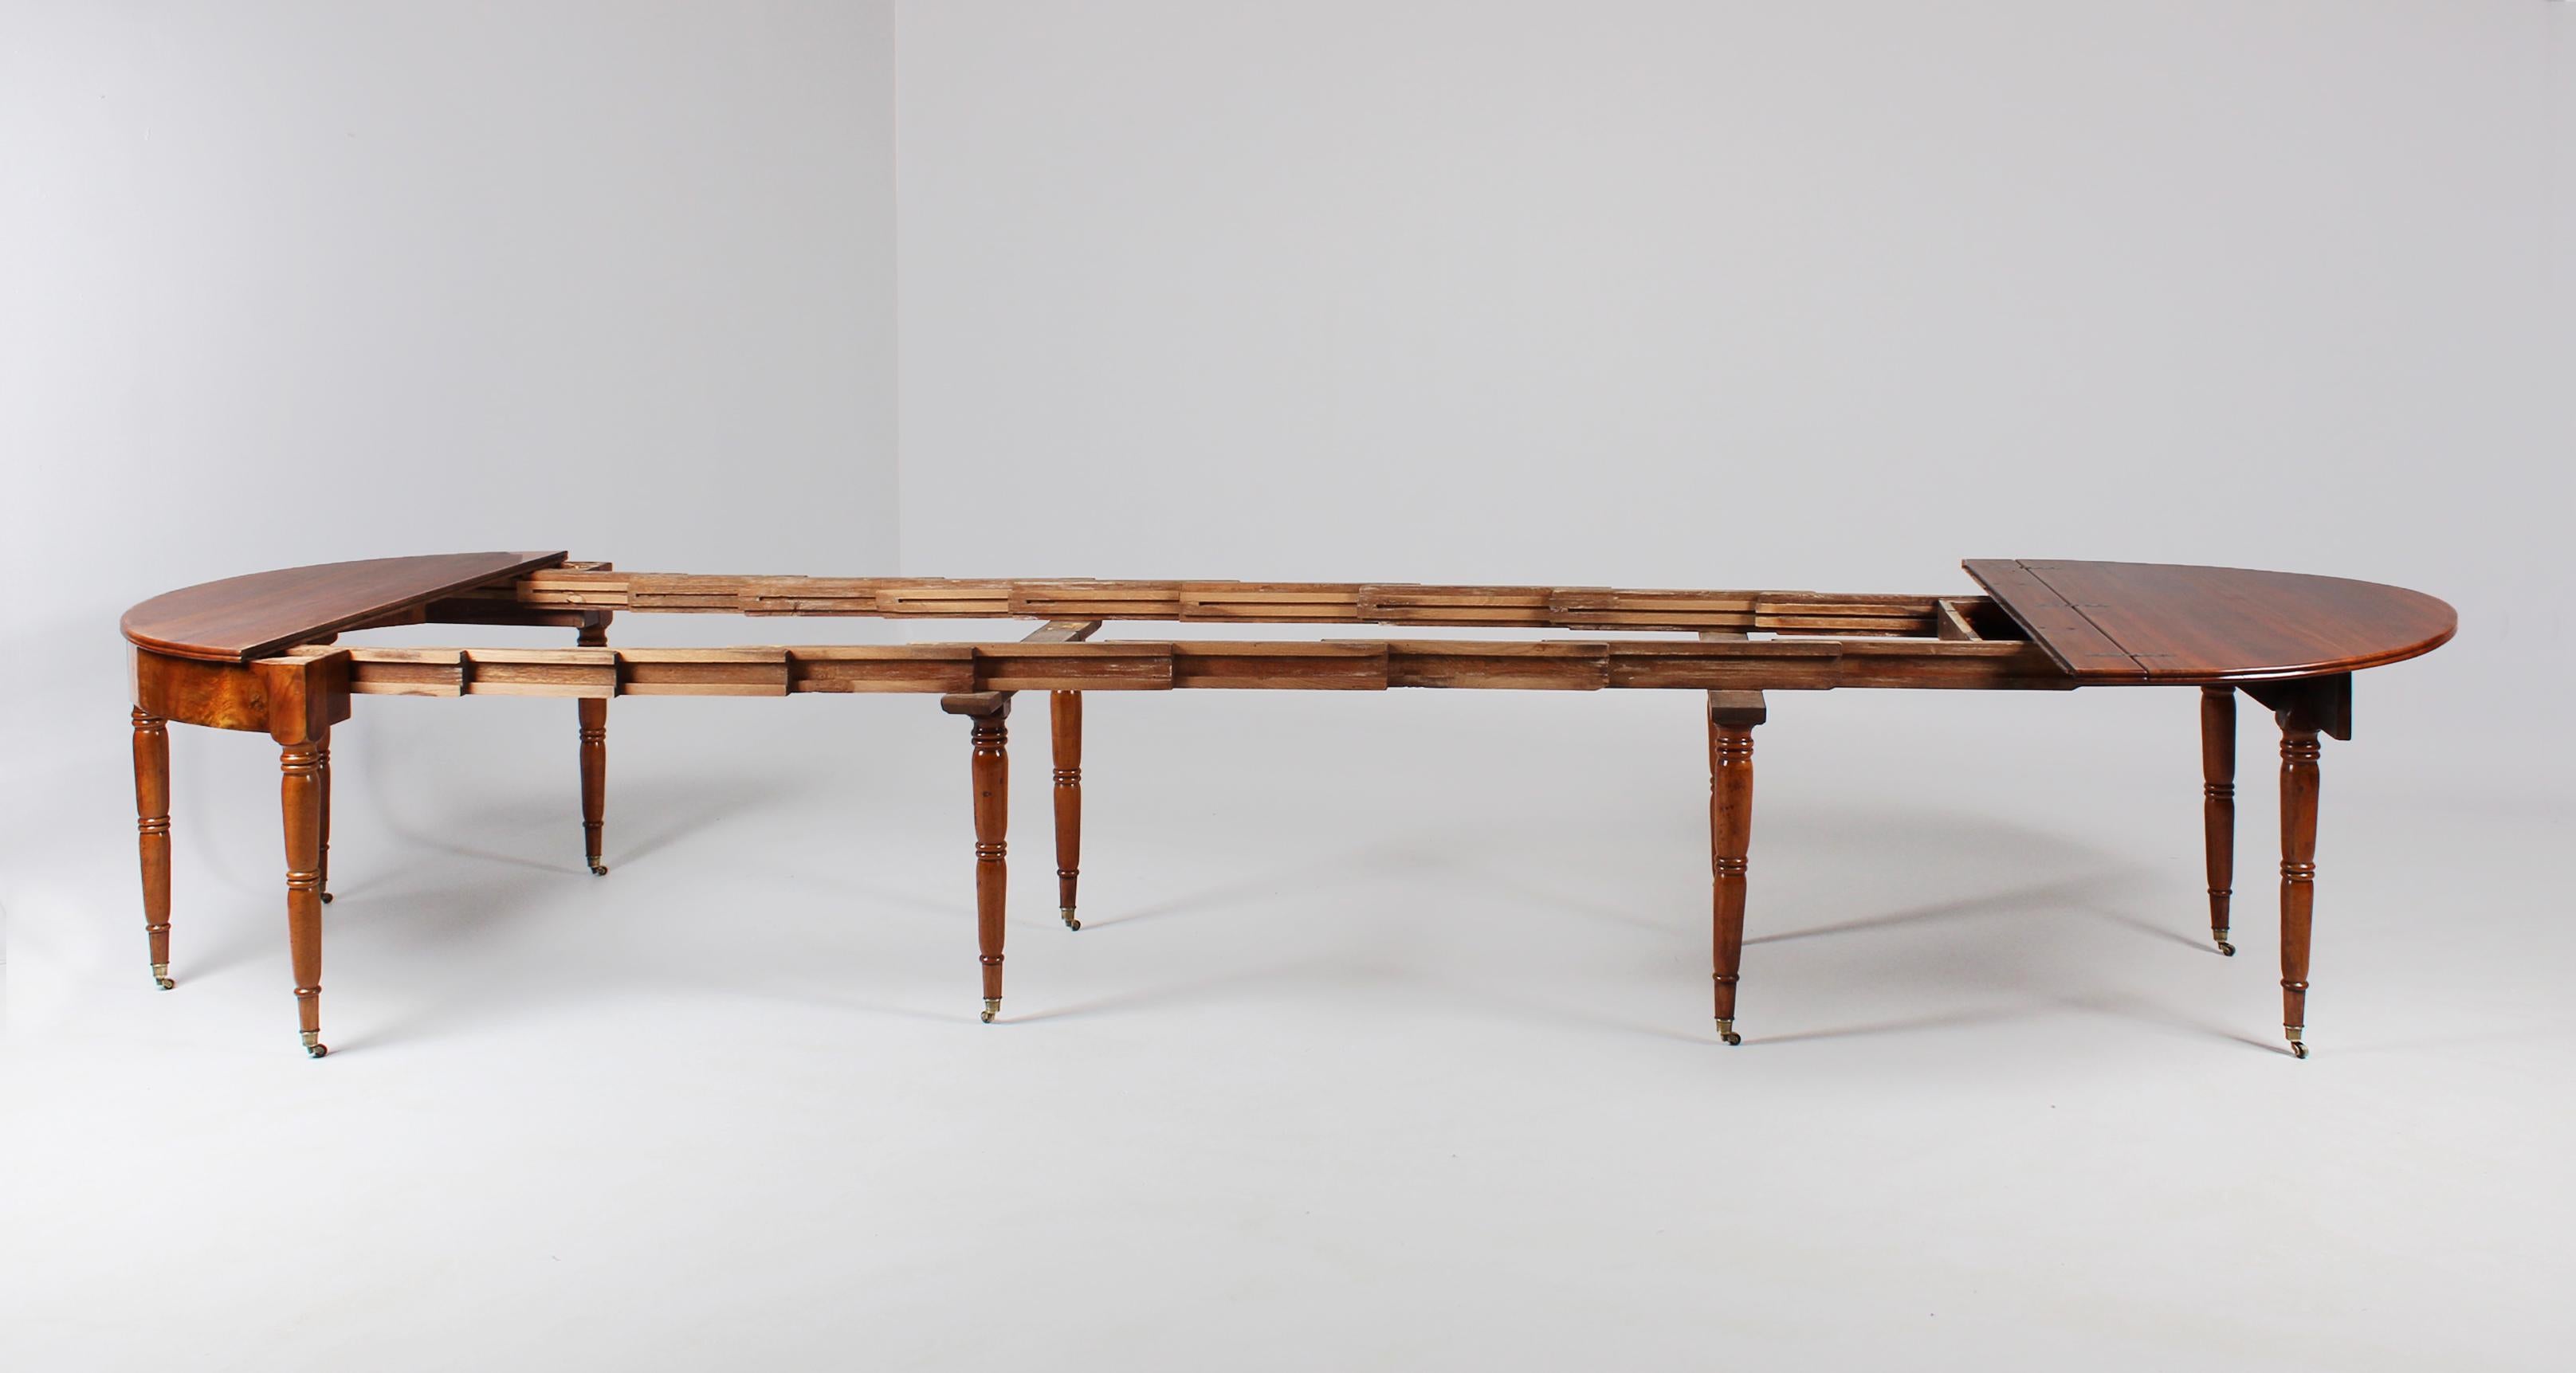 Large 19th Century Dining Table, Walnut, 12-16 People 4